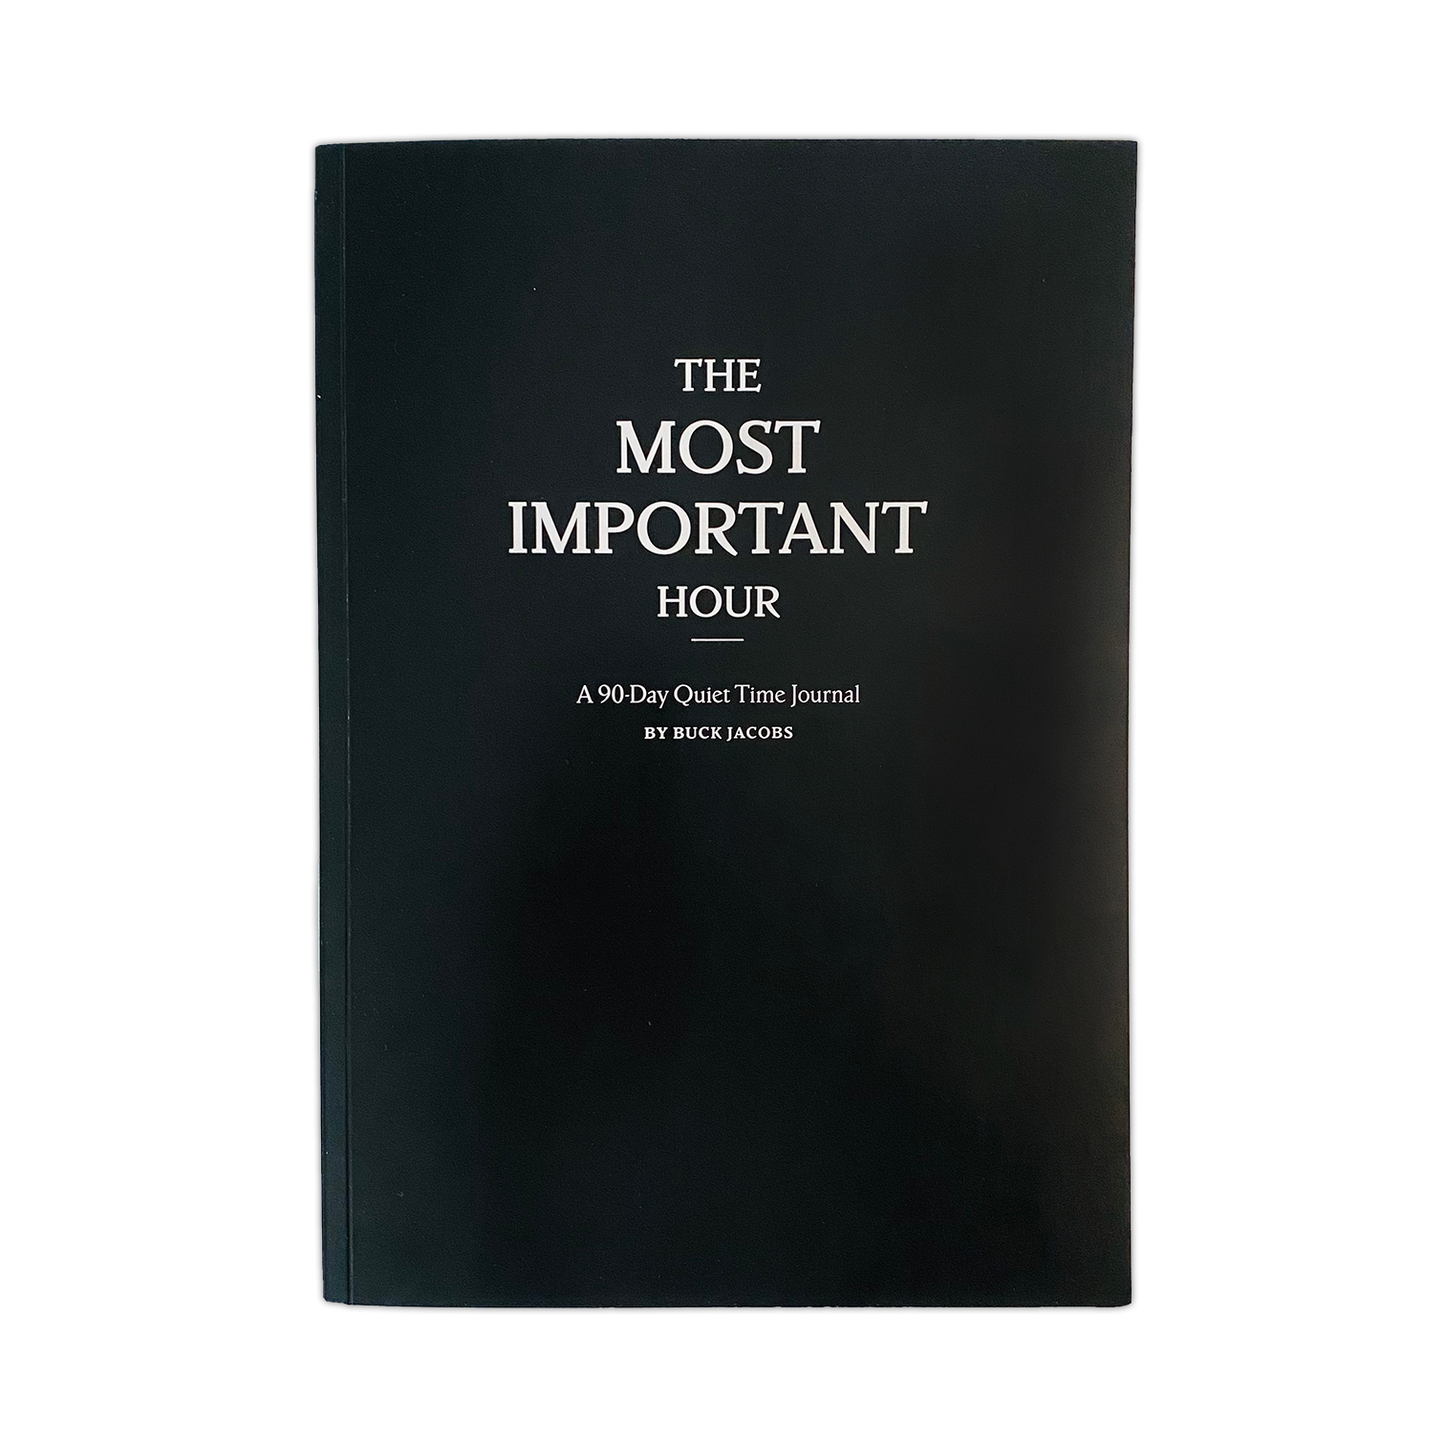 The Most Important Hour: A 90-Day Quiet Time Journal